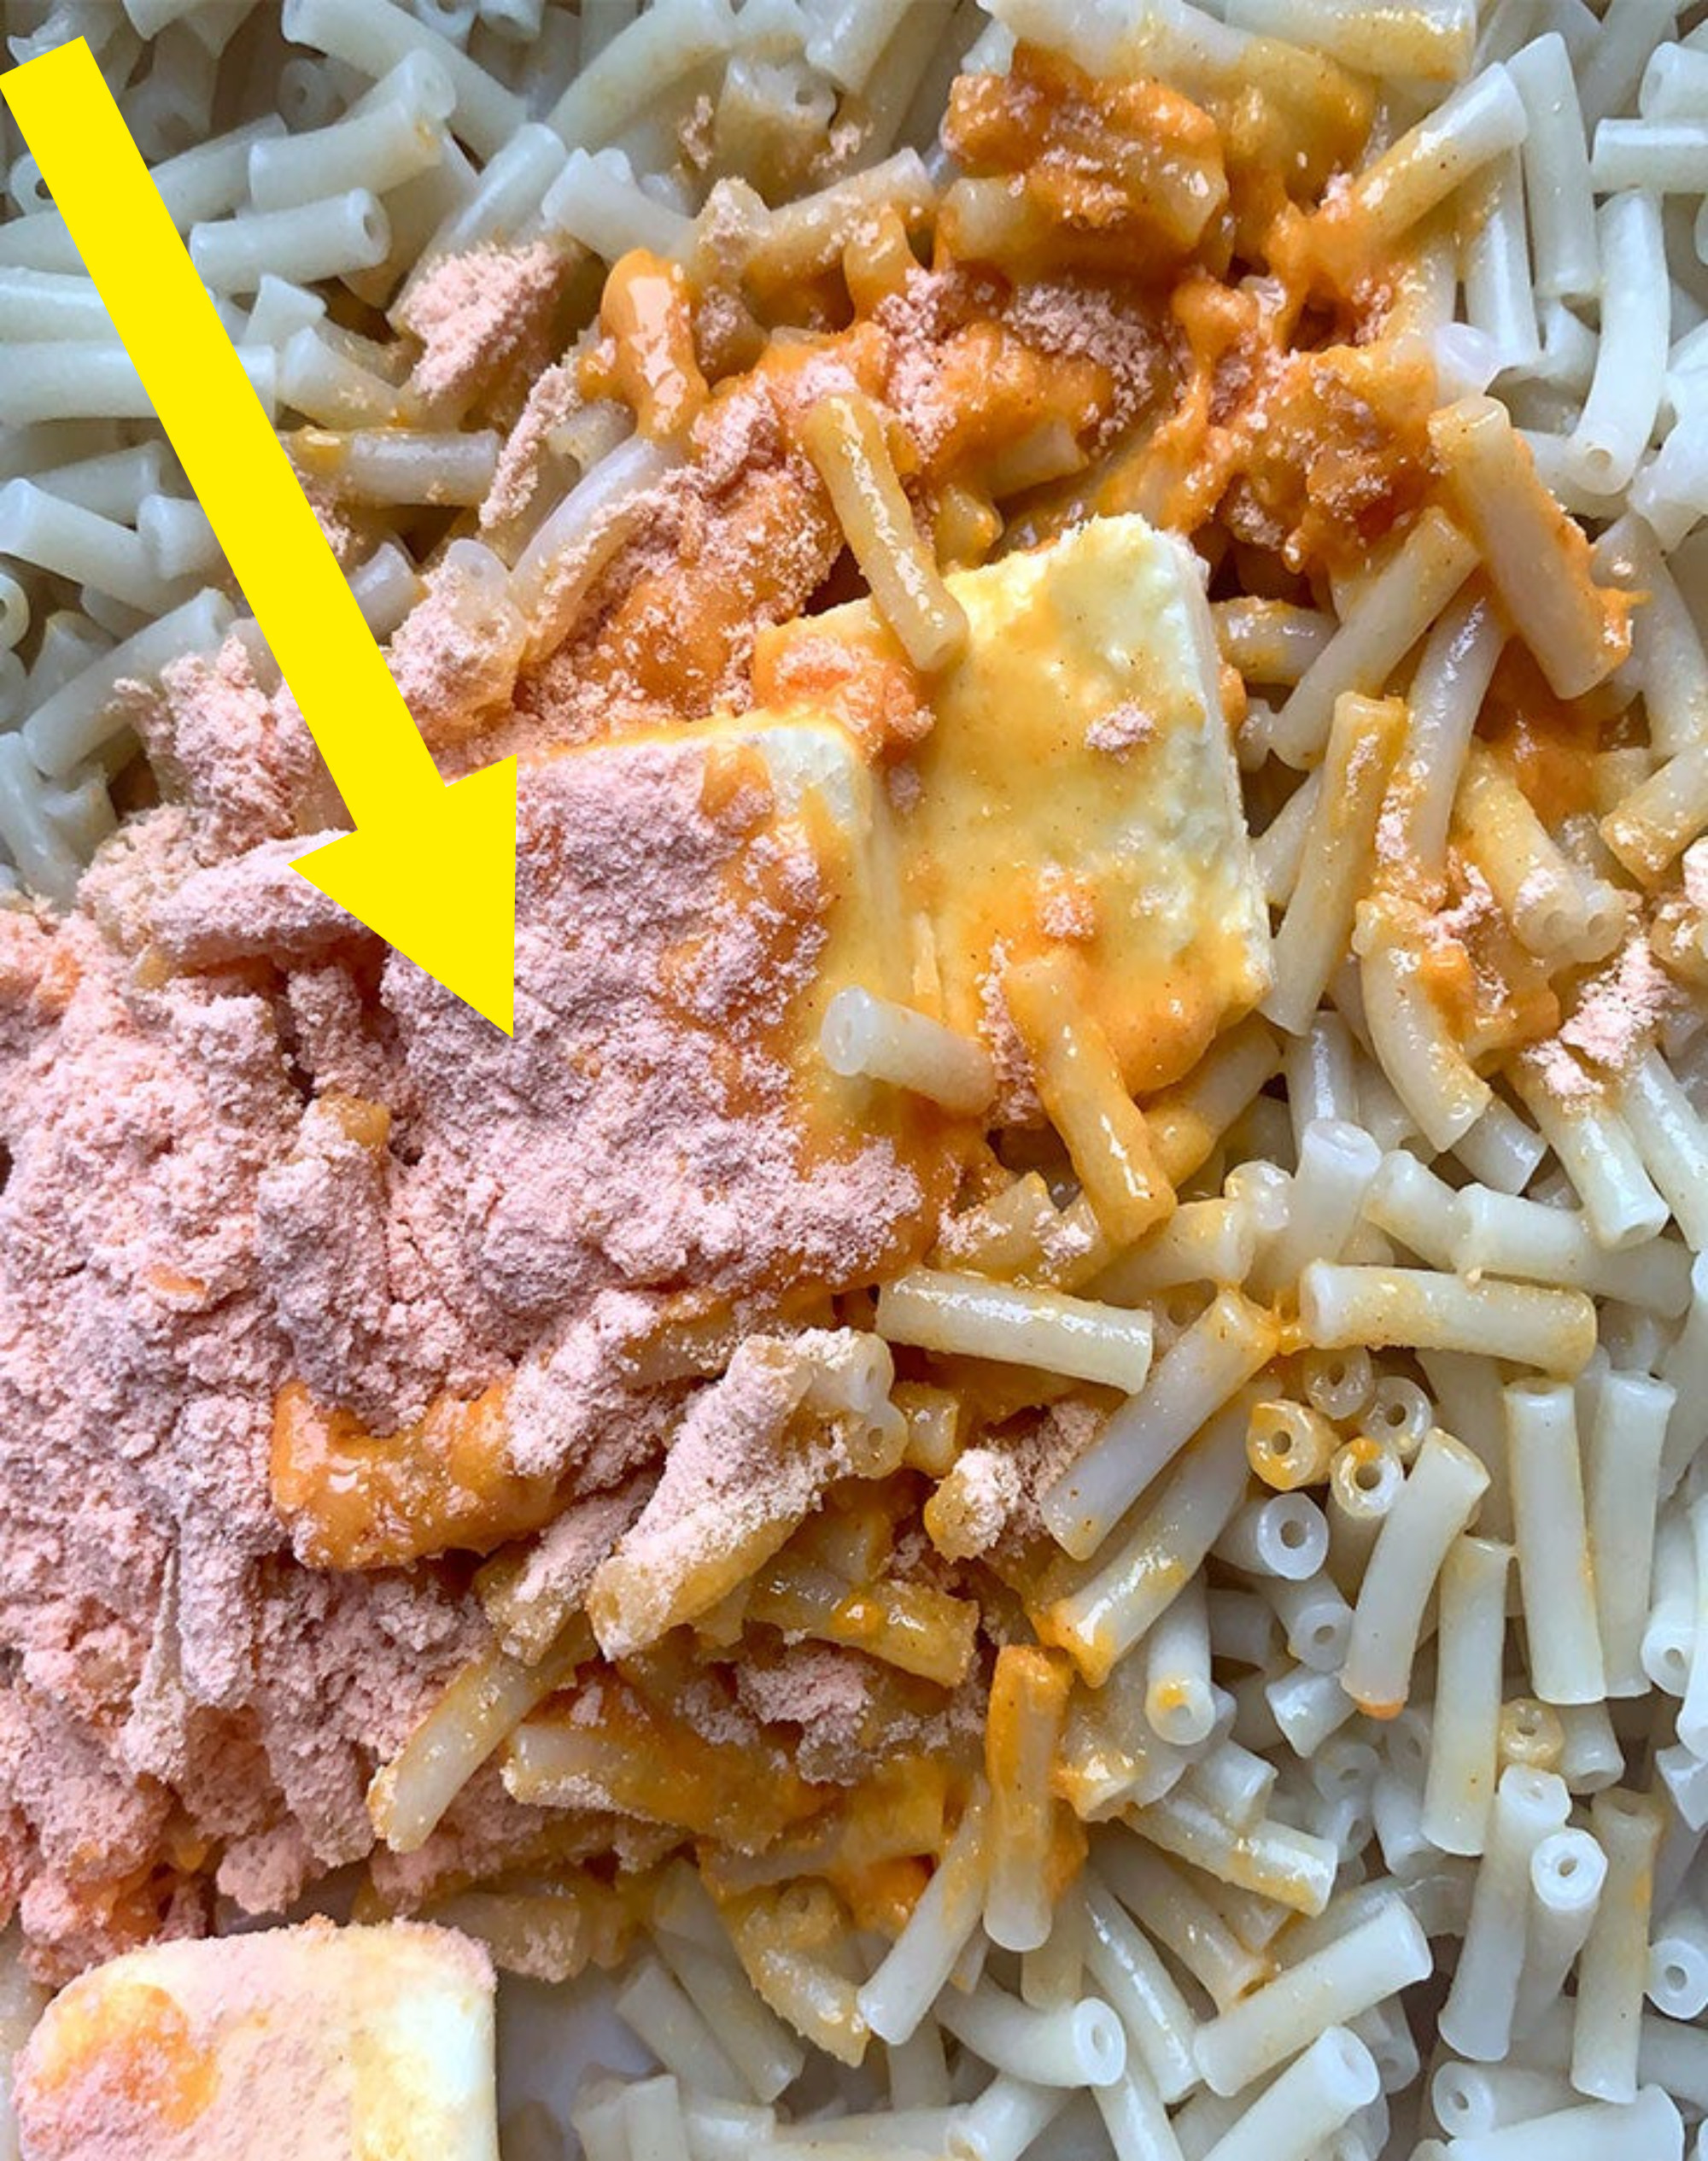 Noodles with butter and cheese seasoning.